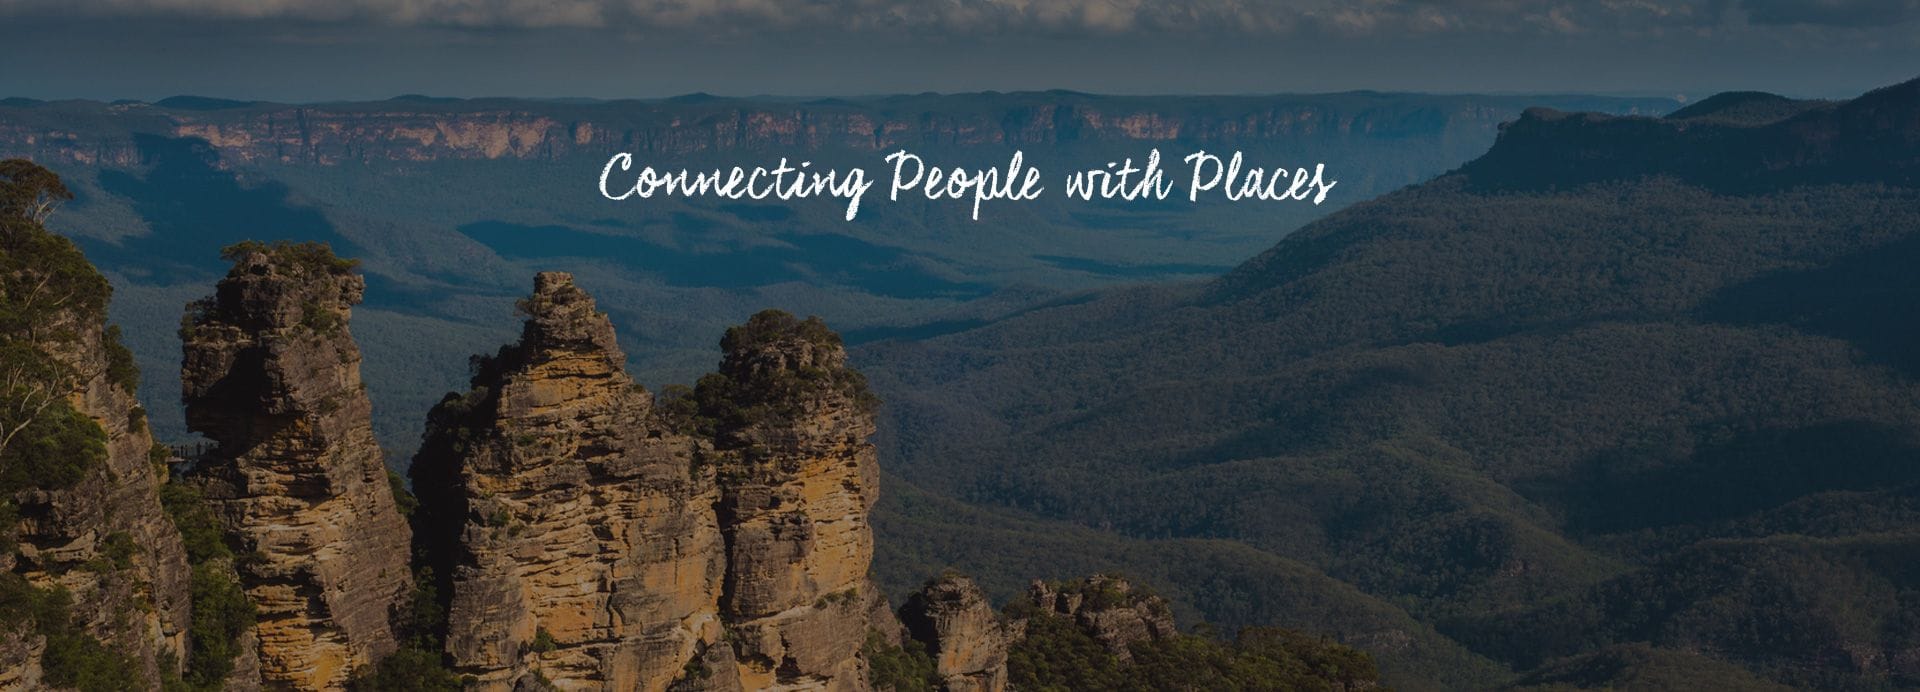 Connect Coaches - Connecting People With Places Image -65923d0c81f64